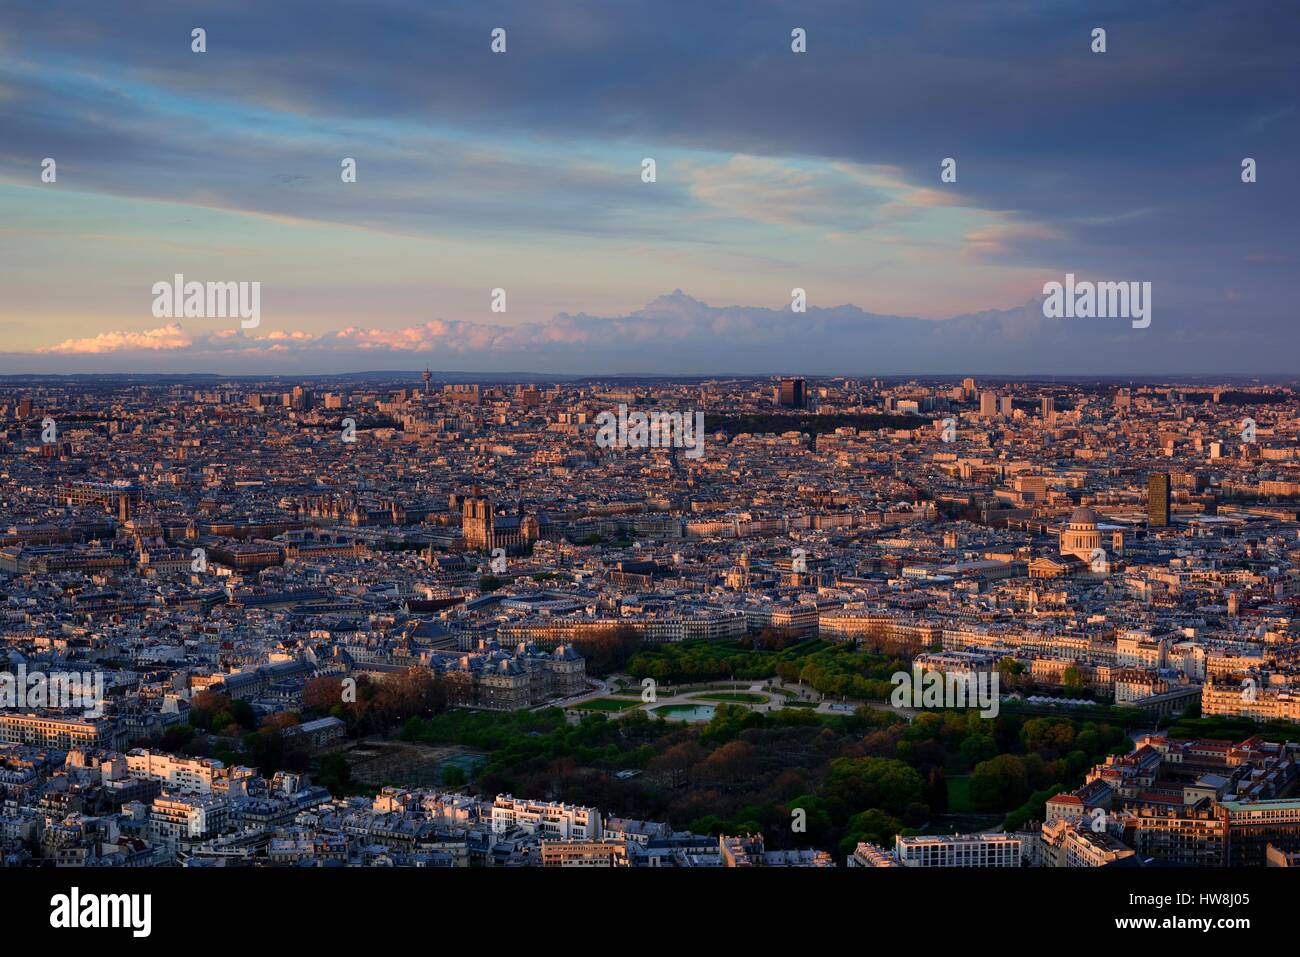 France, Paris, a rainbow of the the jardin du Luxembourg and the Pantheon, Hotel de Ville, Notre Dame de Paris and the Centre Beaubourg in the background (aerial view) Stock Photo